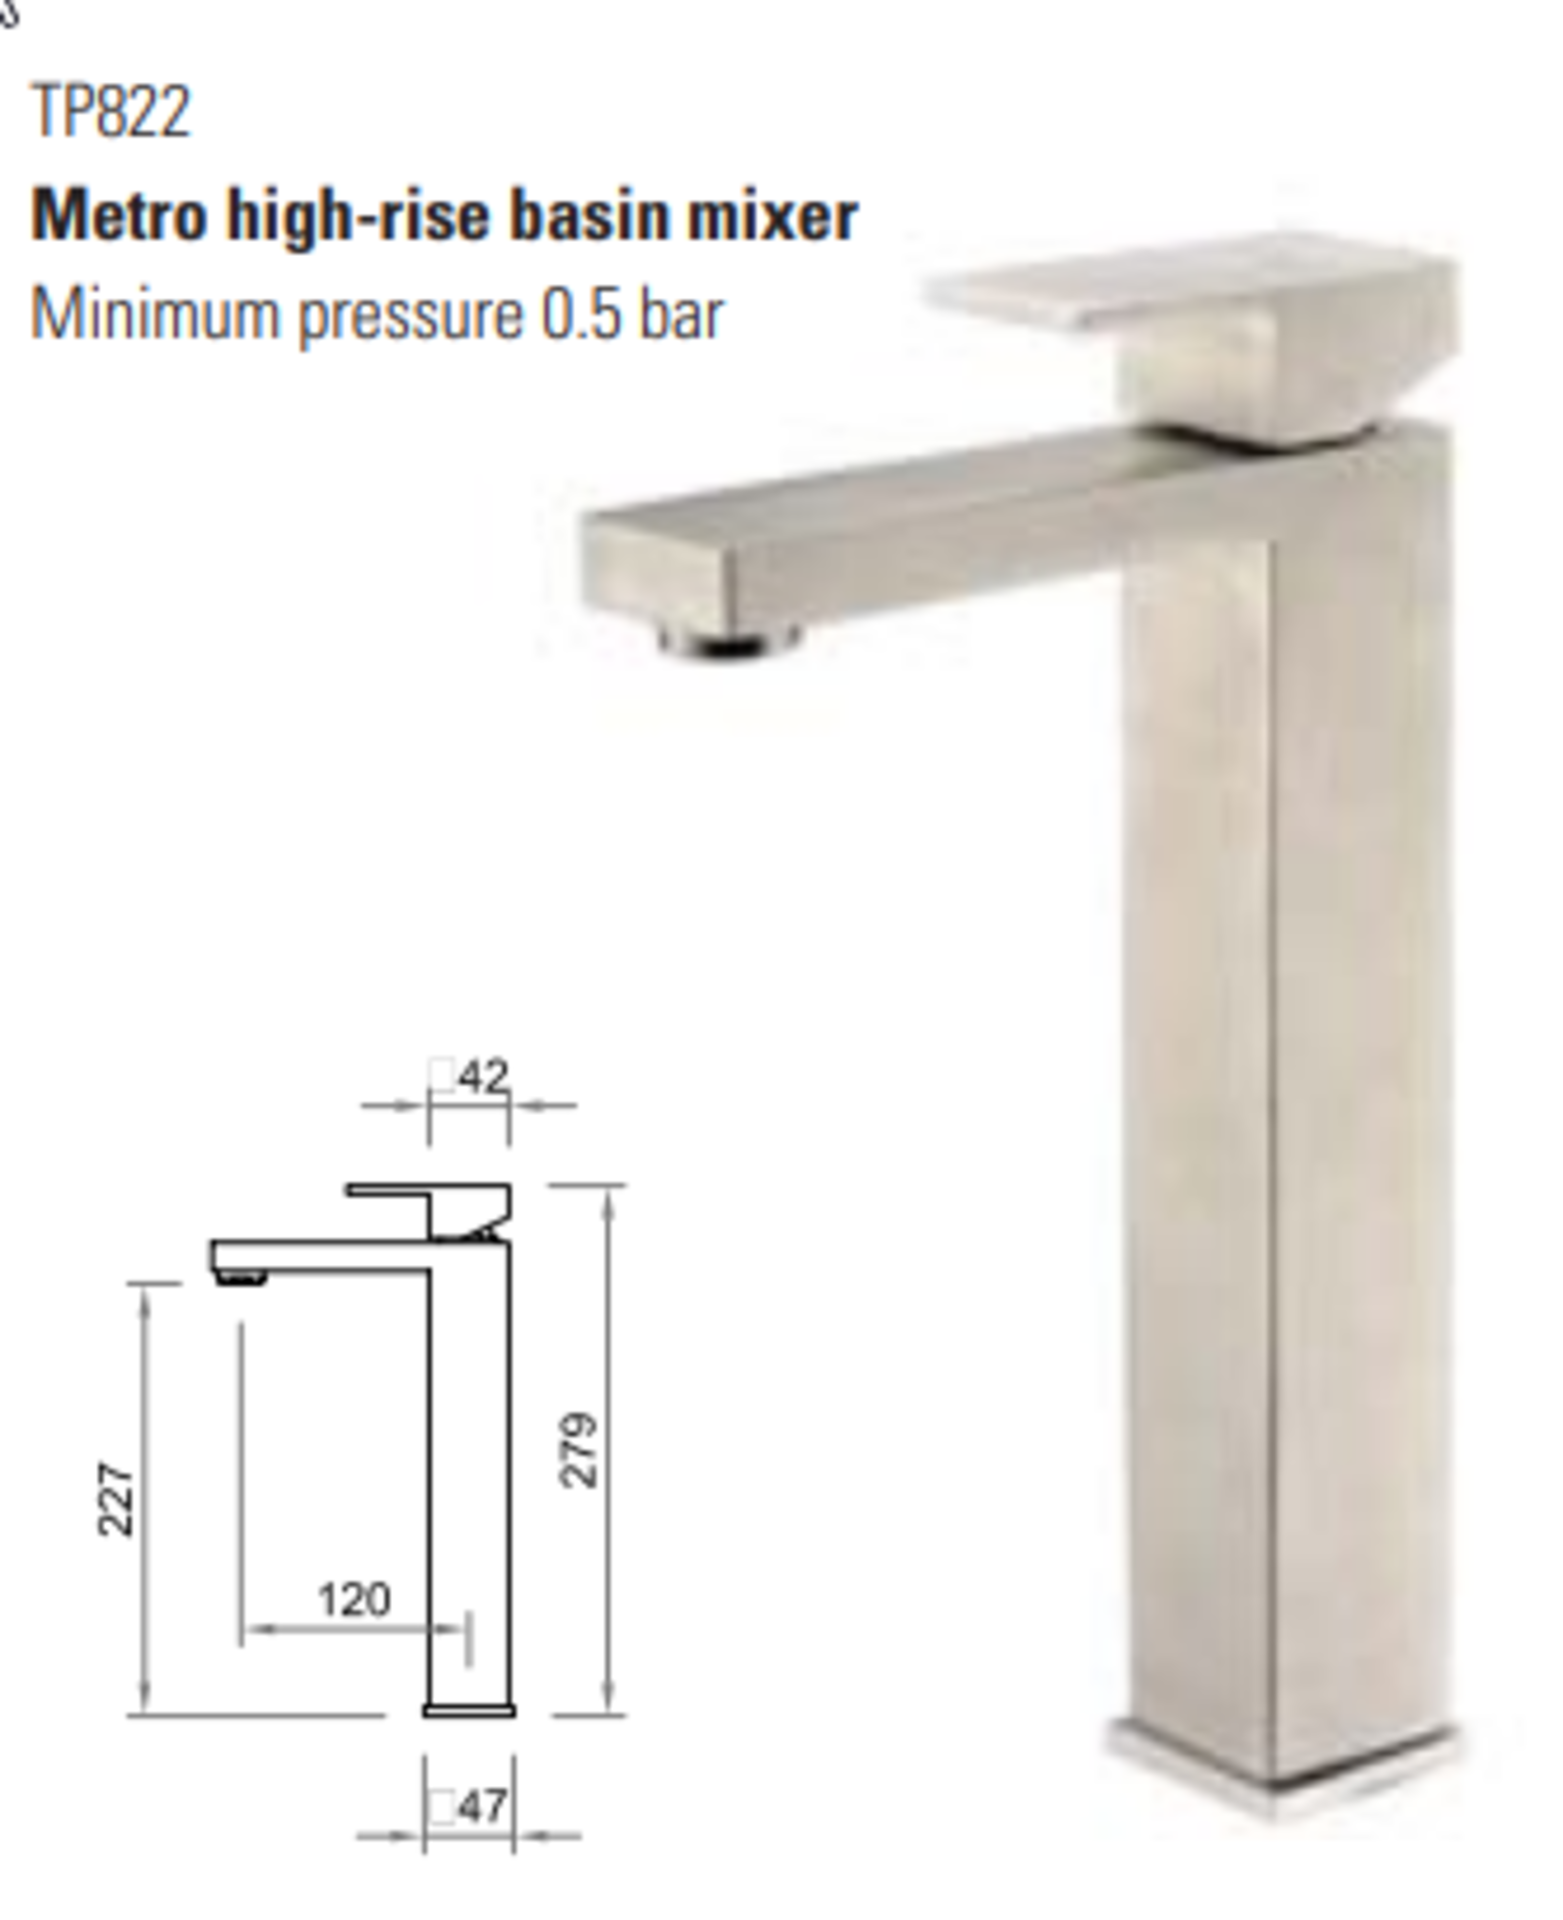 1 x Stonearth 'Metro' Stainless Steel High Riser Basin Mixer Tap - Brand New & Boxed - RRP £295 -